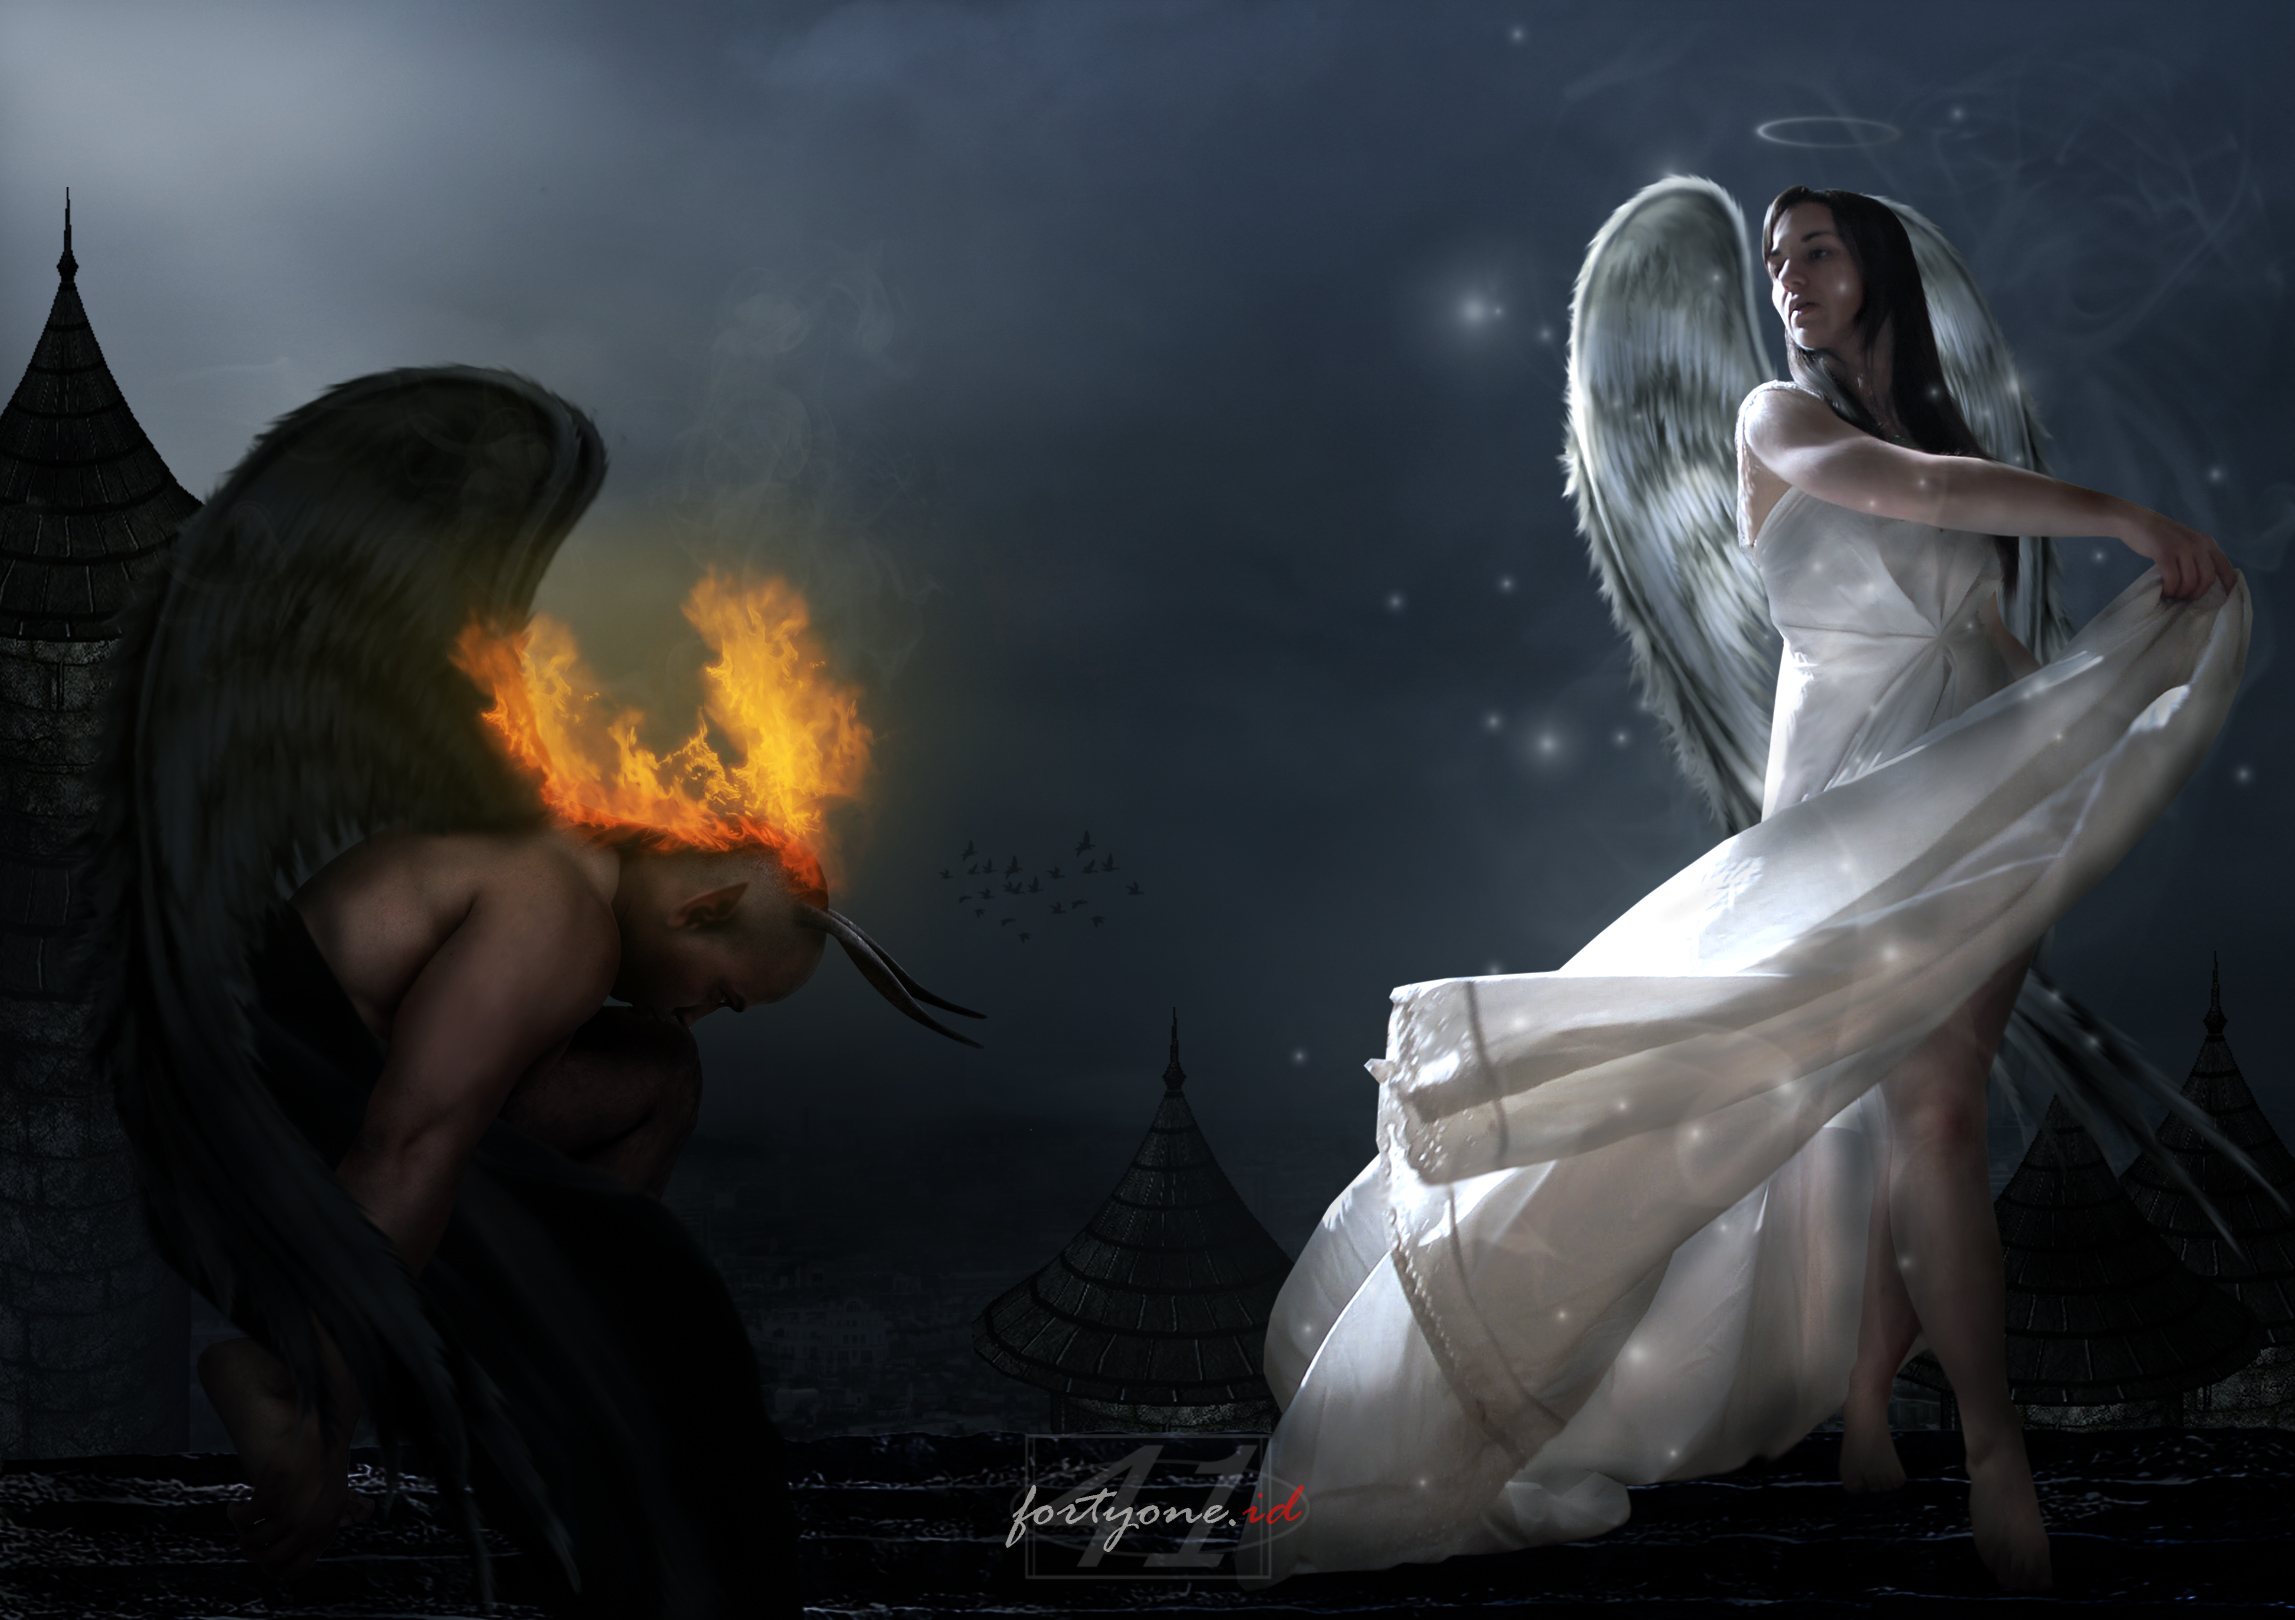  Angels Devil And Angel Wallpaper 2295x1620 Full HD Wallpapers